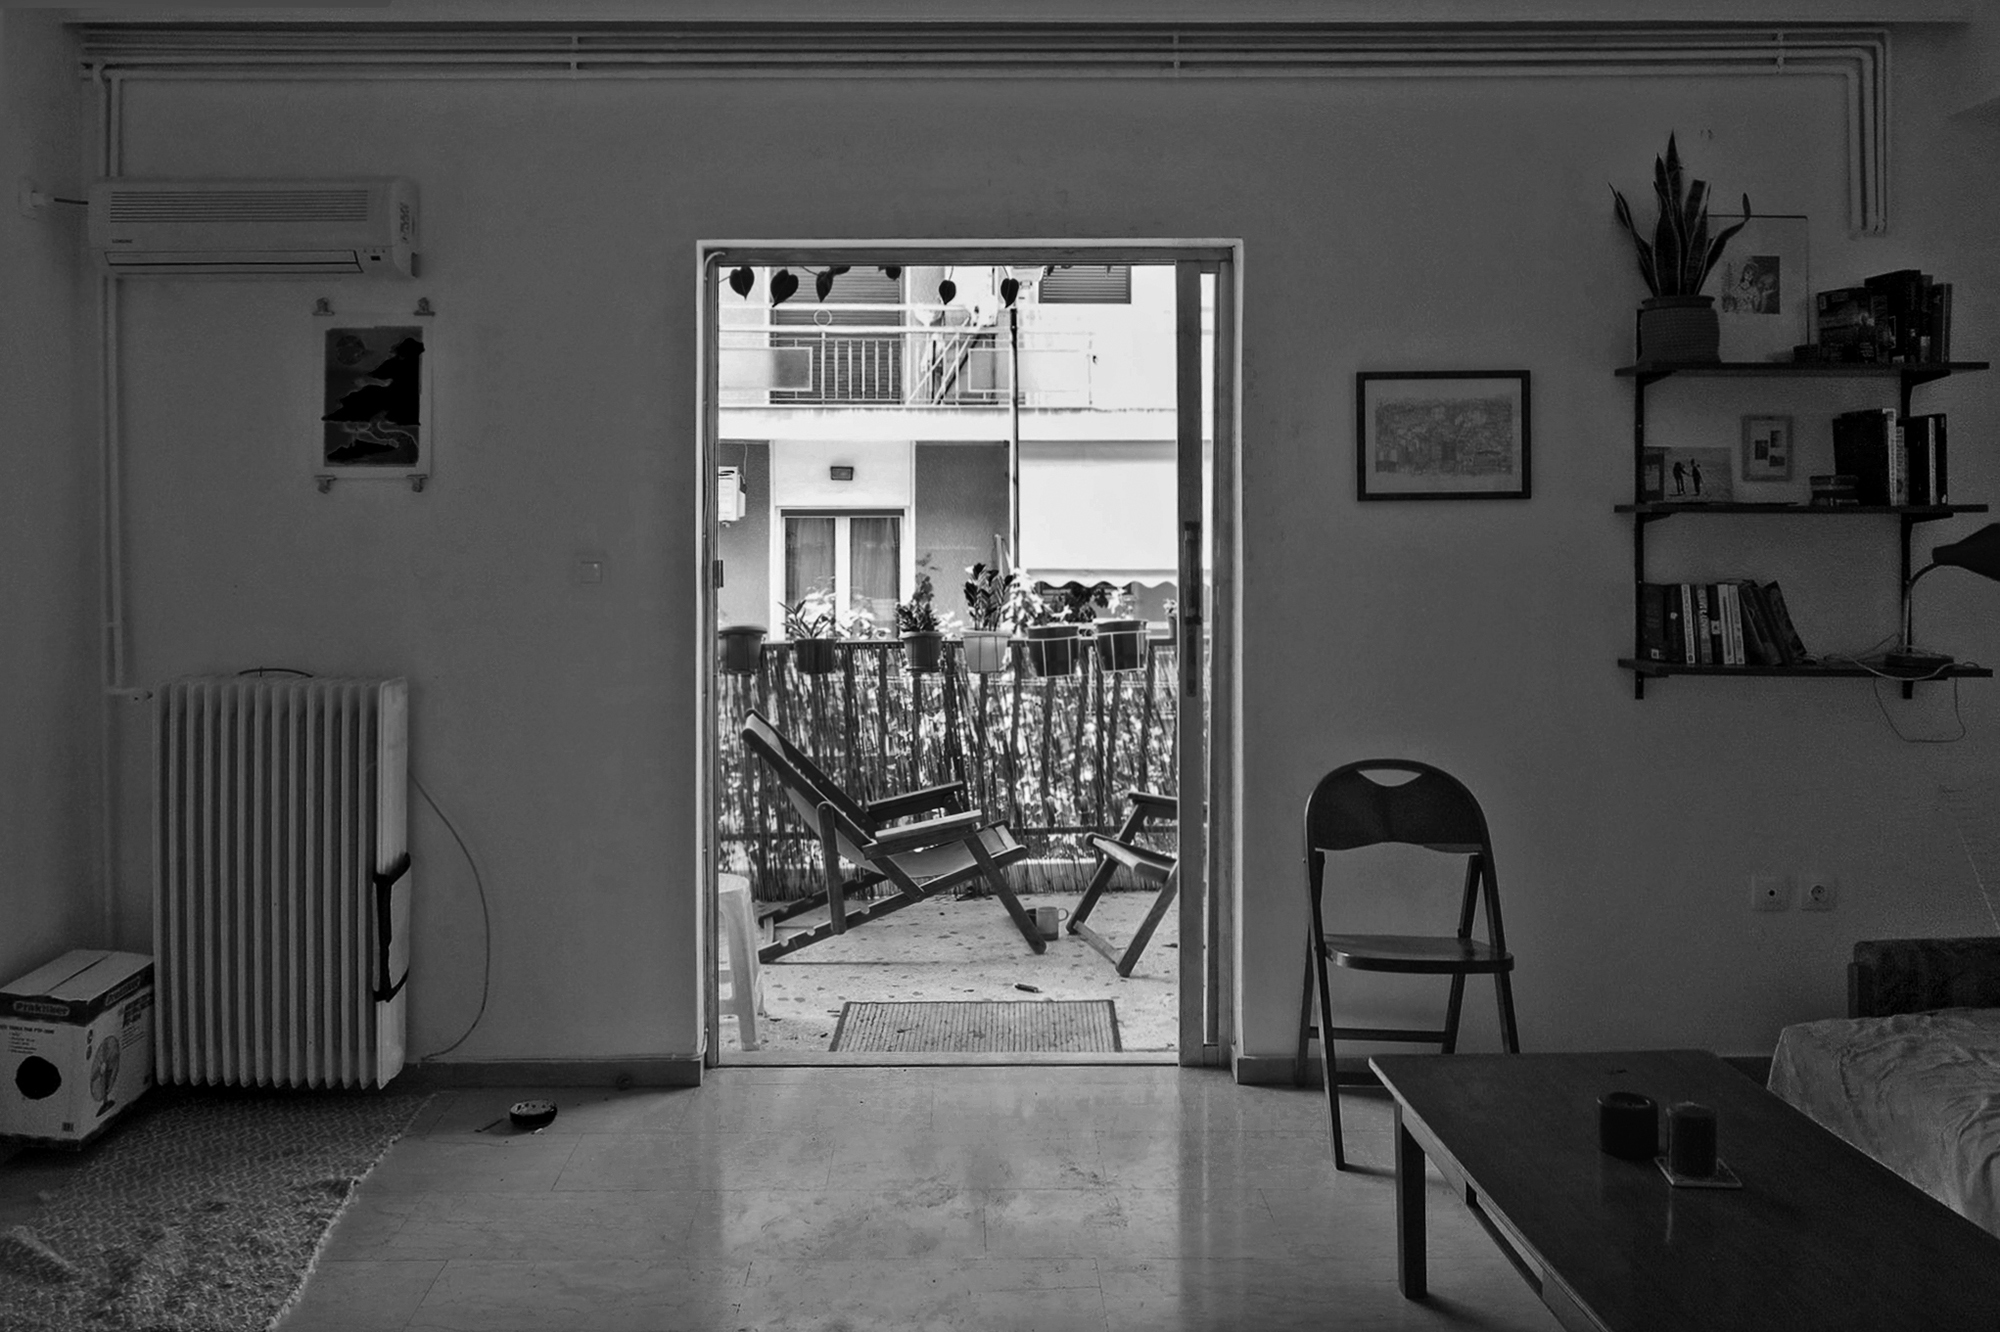 View of the threshold stage of a balcony in Petralona, Athens. August 2020. Source: George Kafka